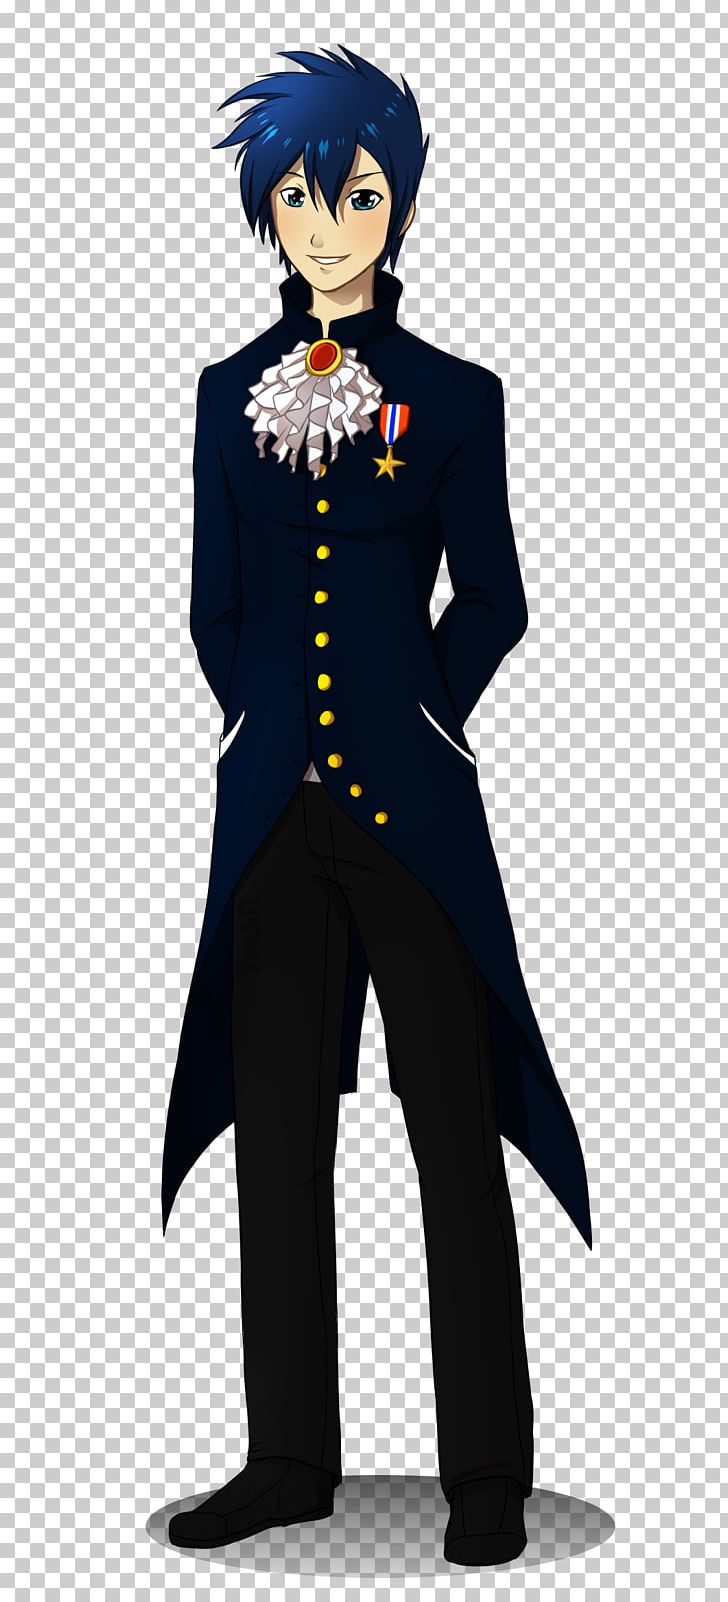 Elegantly Suited: A Handsome Man Steals the Spotlight in a Classic Tuxedo |  スーツ キャラ, 男の子 イラスト, 立ち絵 ポーズ